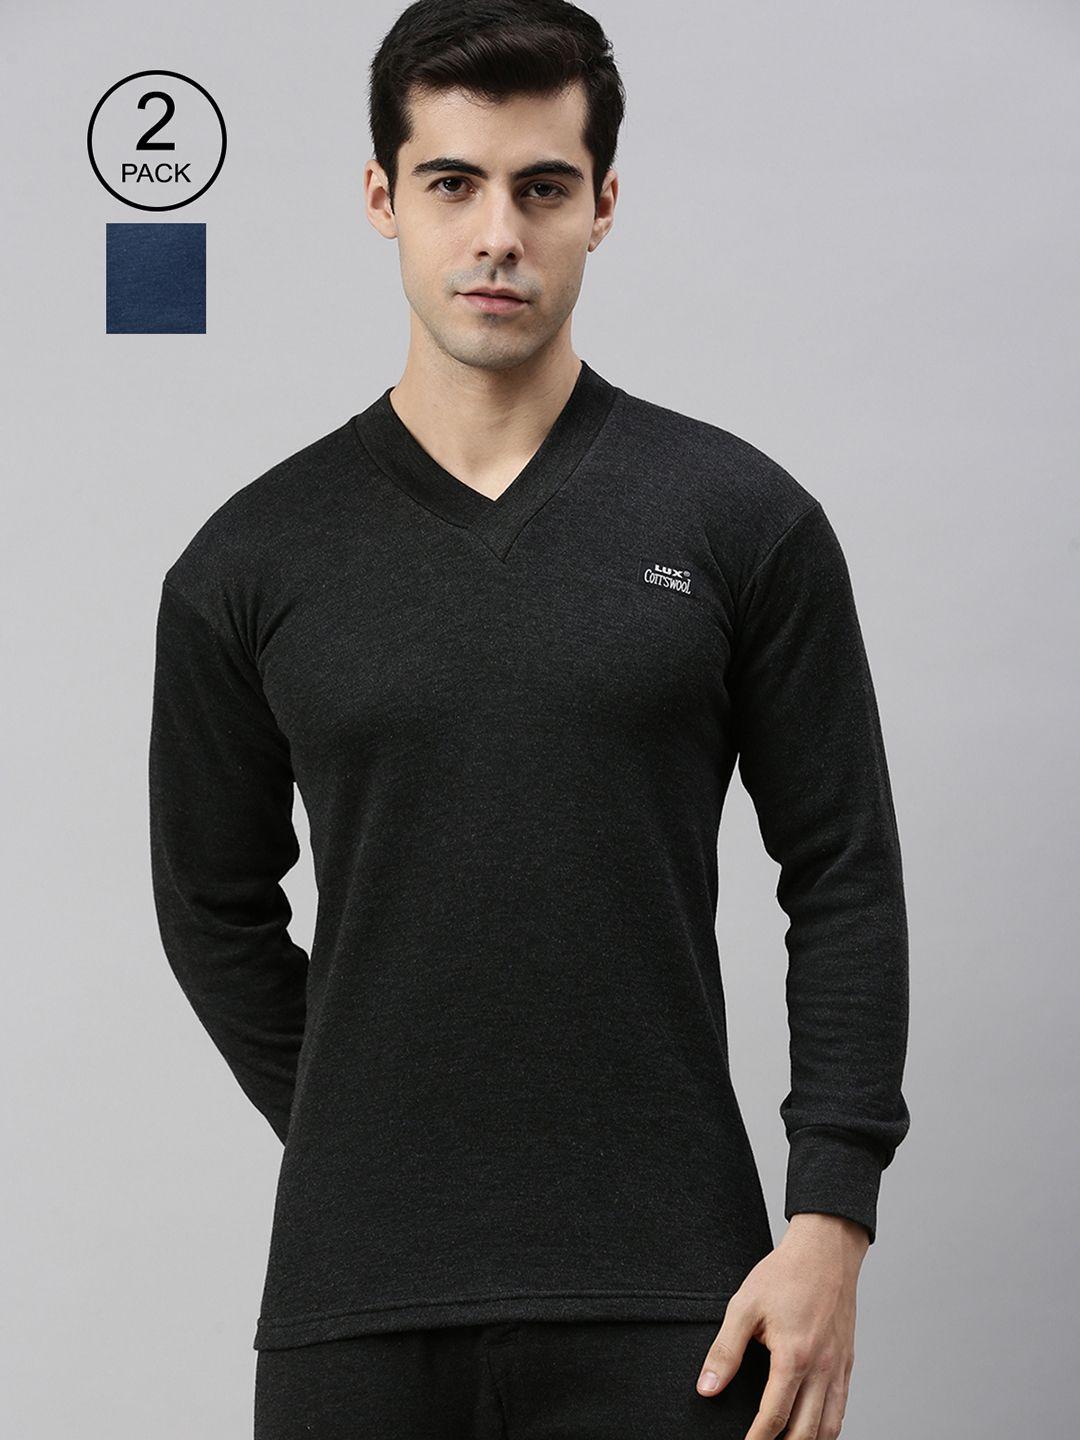 lux-cottswool-men-pack-of-2-black-&-blue-solid-cotton-thermal-tops